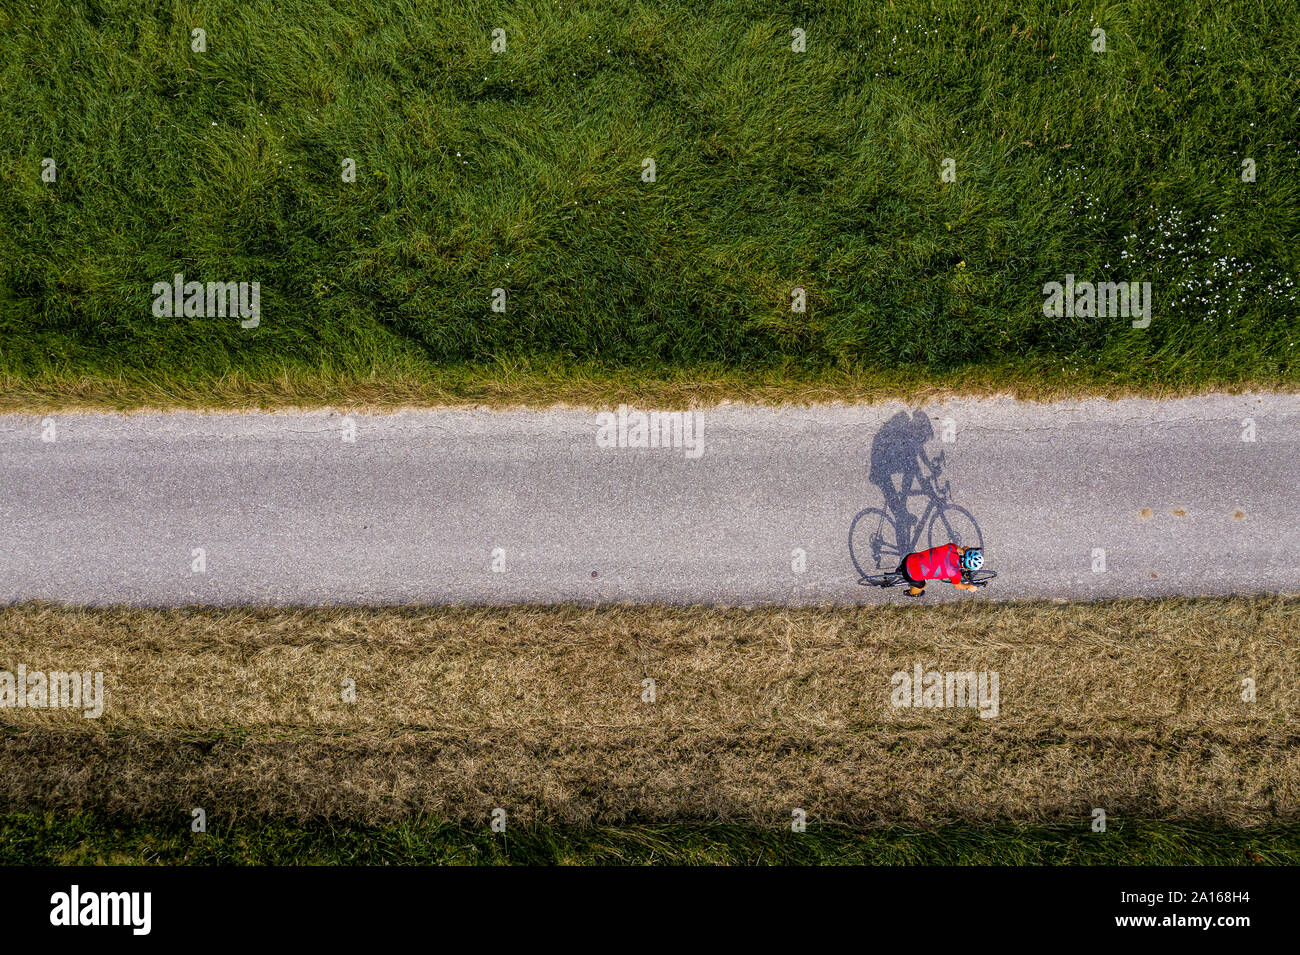 Triathlete riding bicycle on country road, Germany Stock Photo